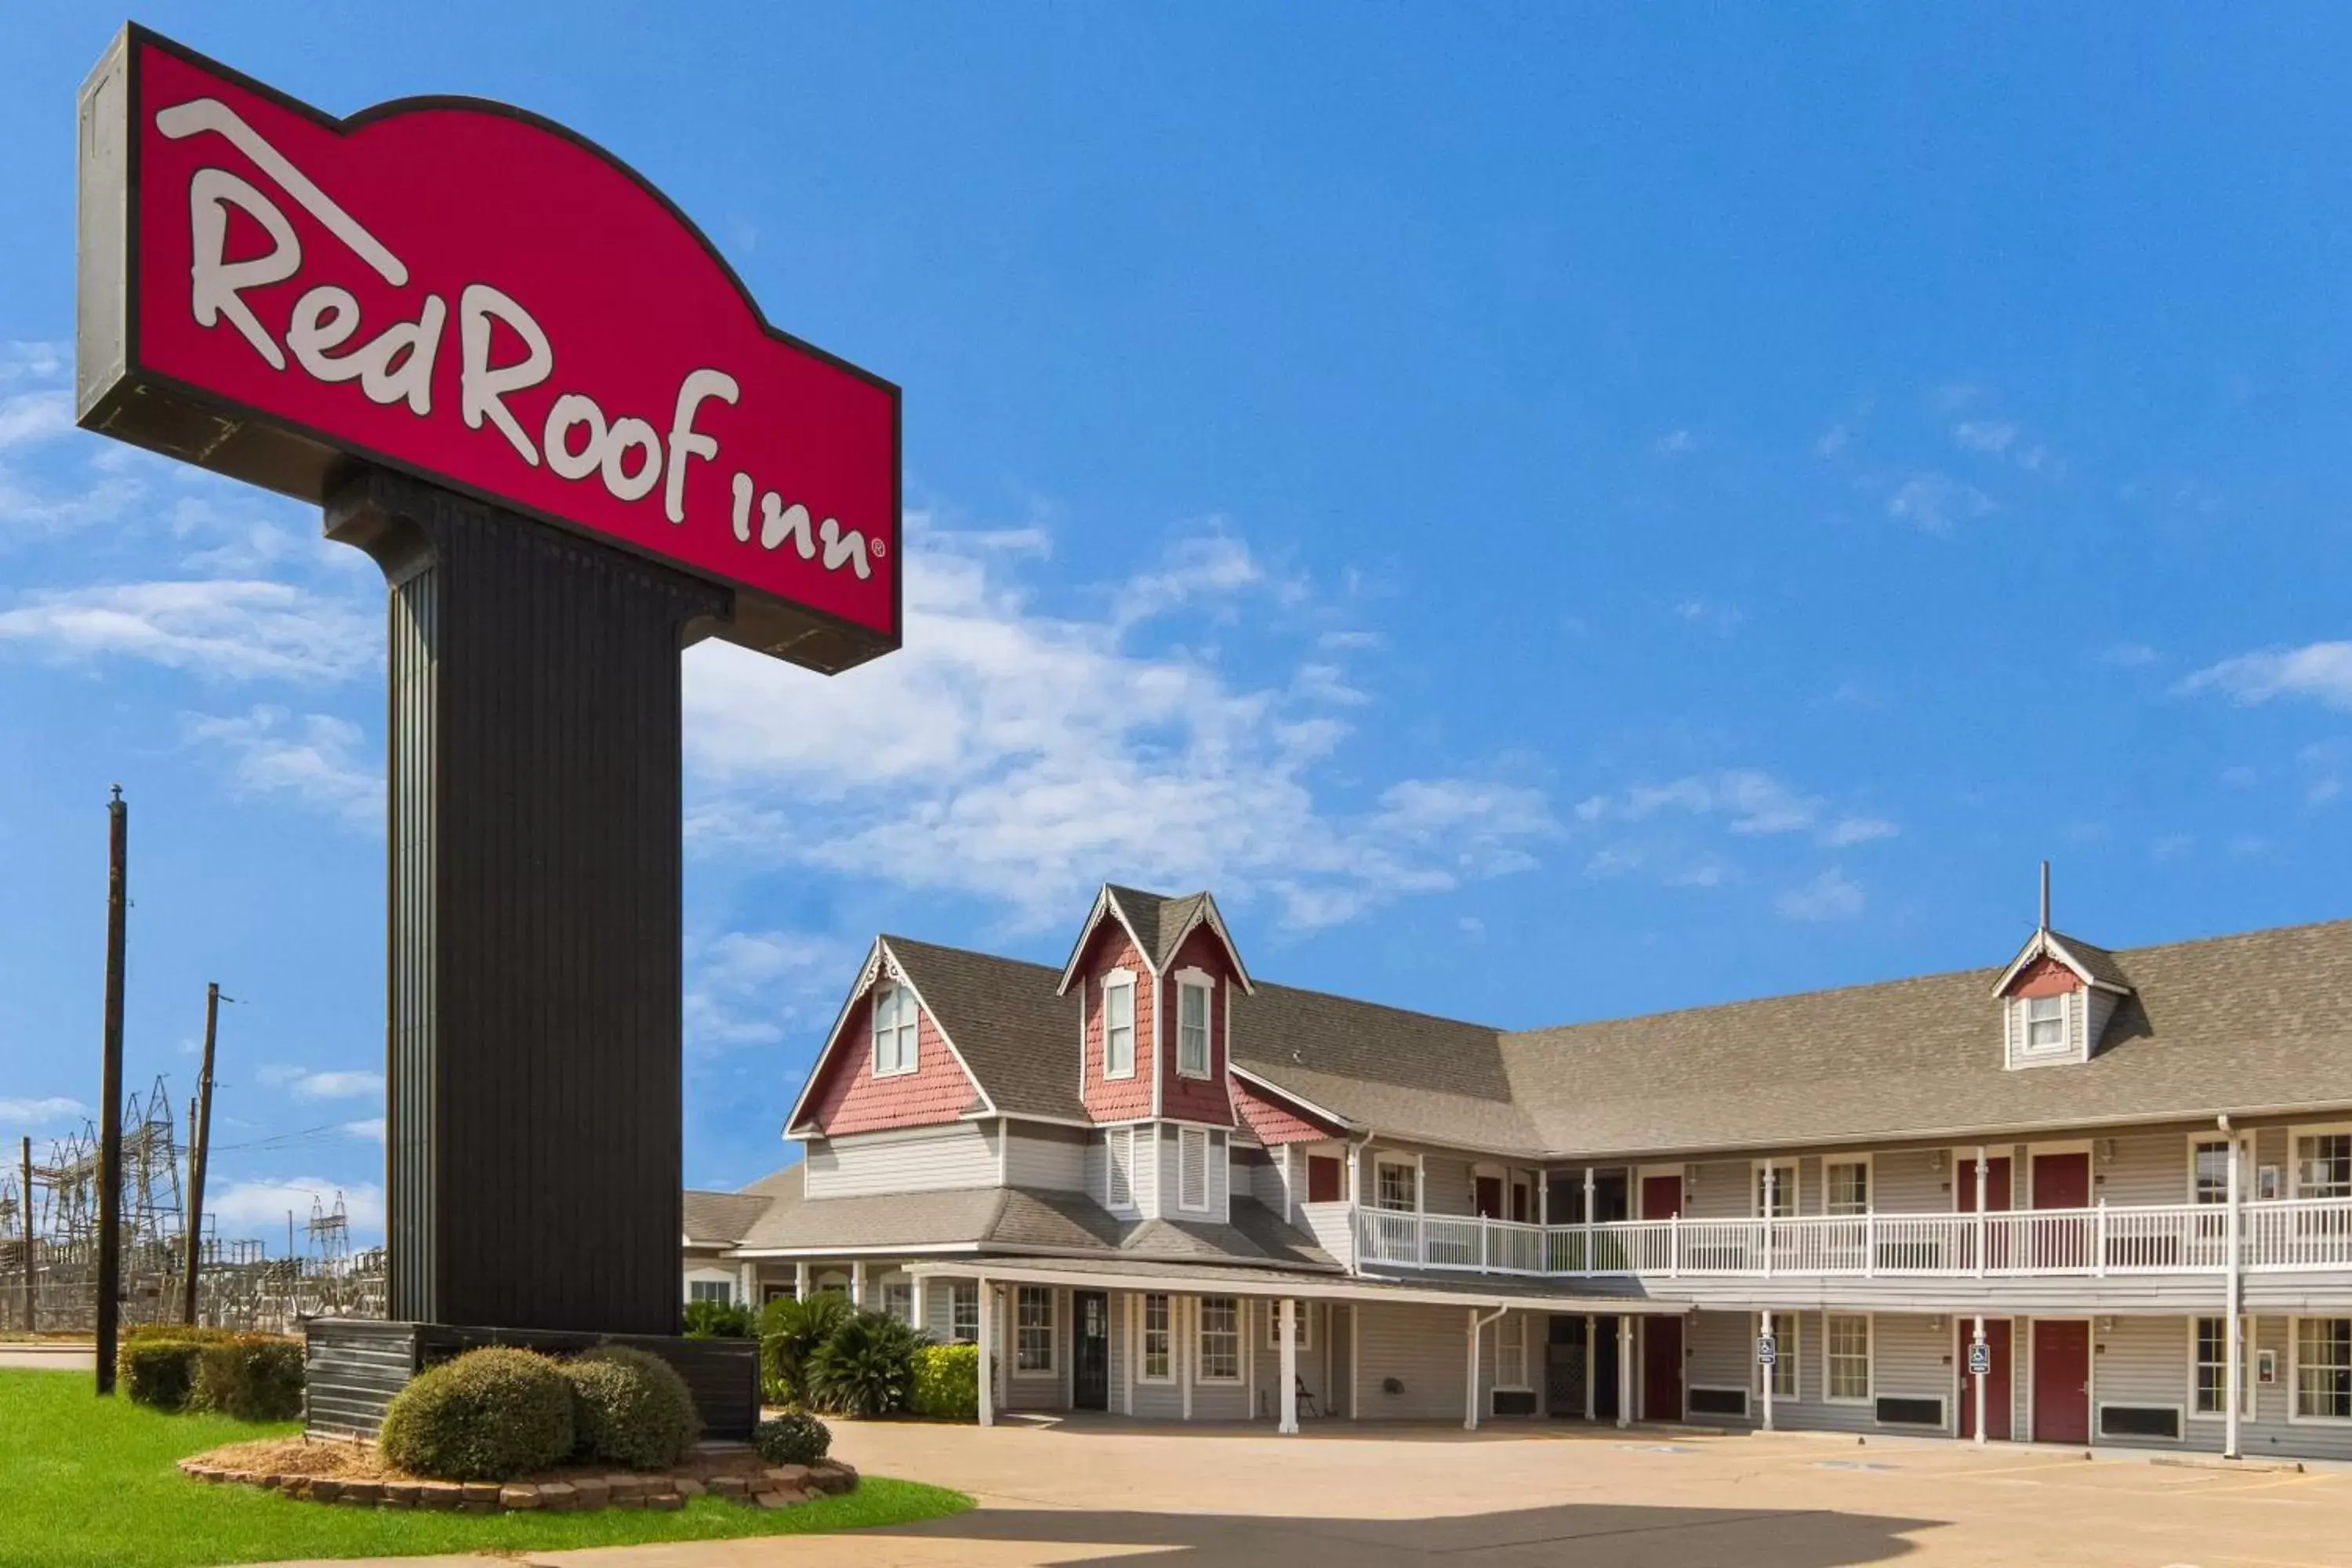 Property Building in Red Roof Inn Waco